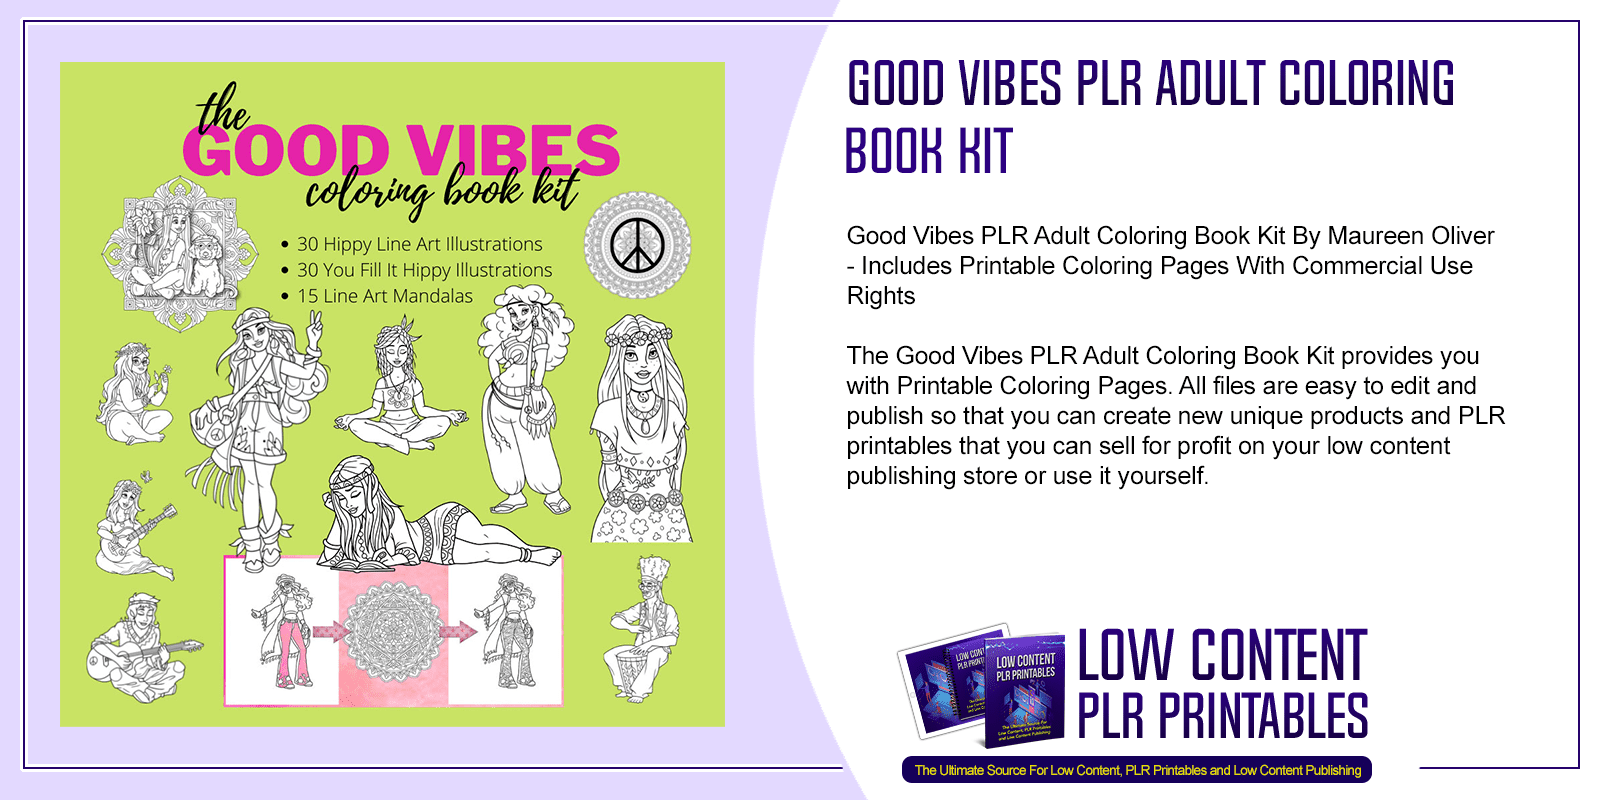 Good Vibes PLR Adult Coloring Book Kit